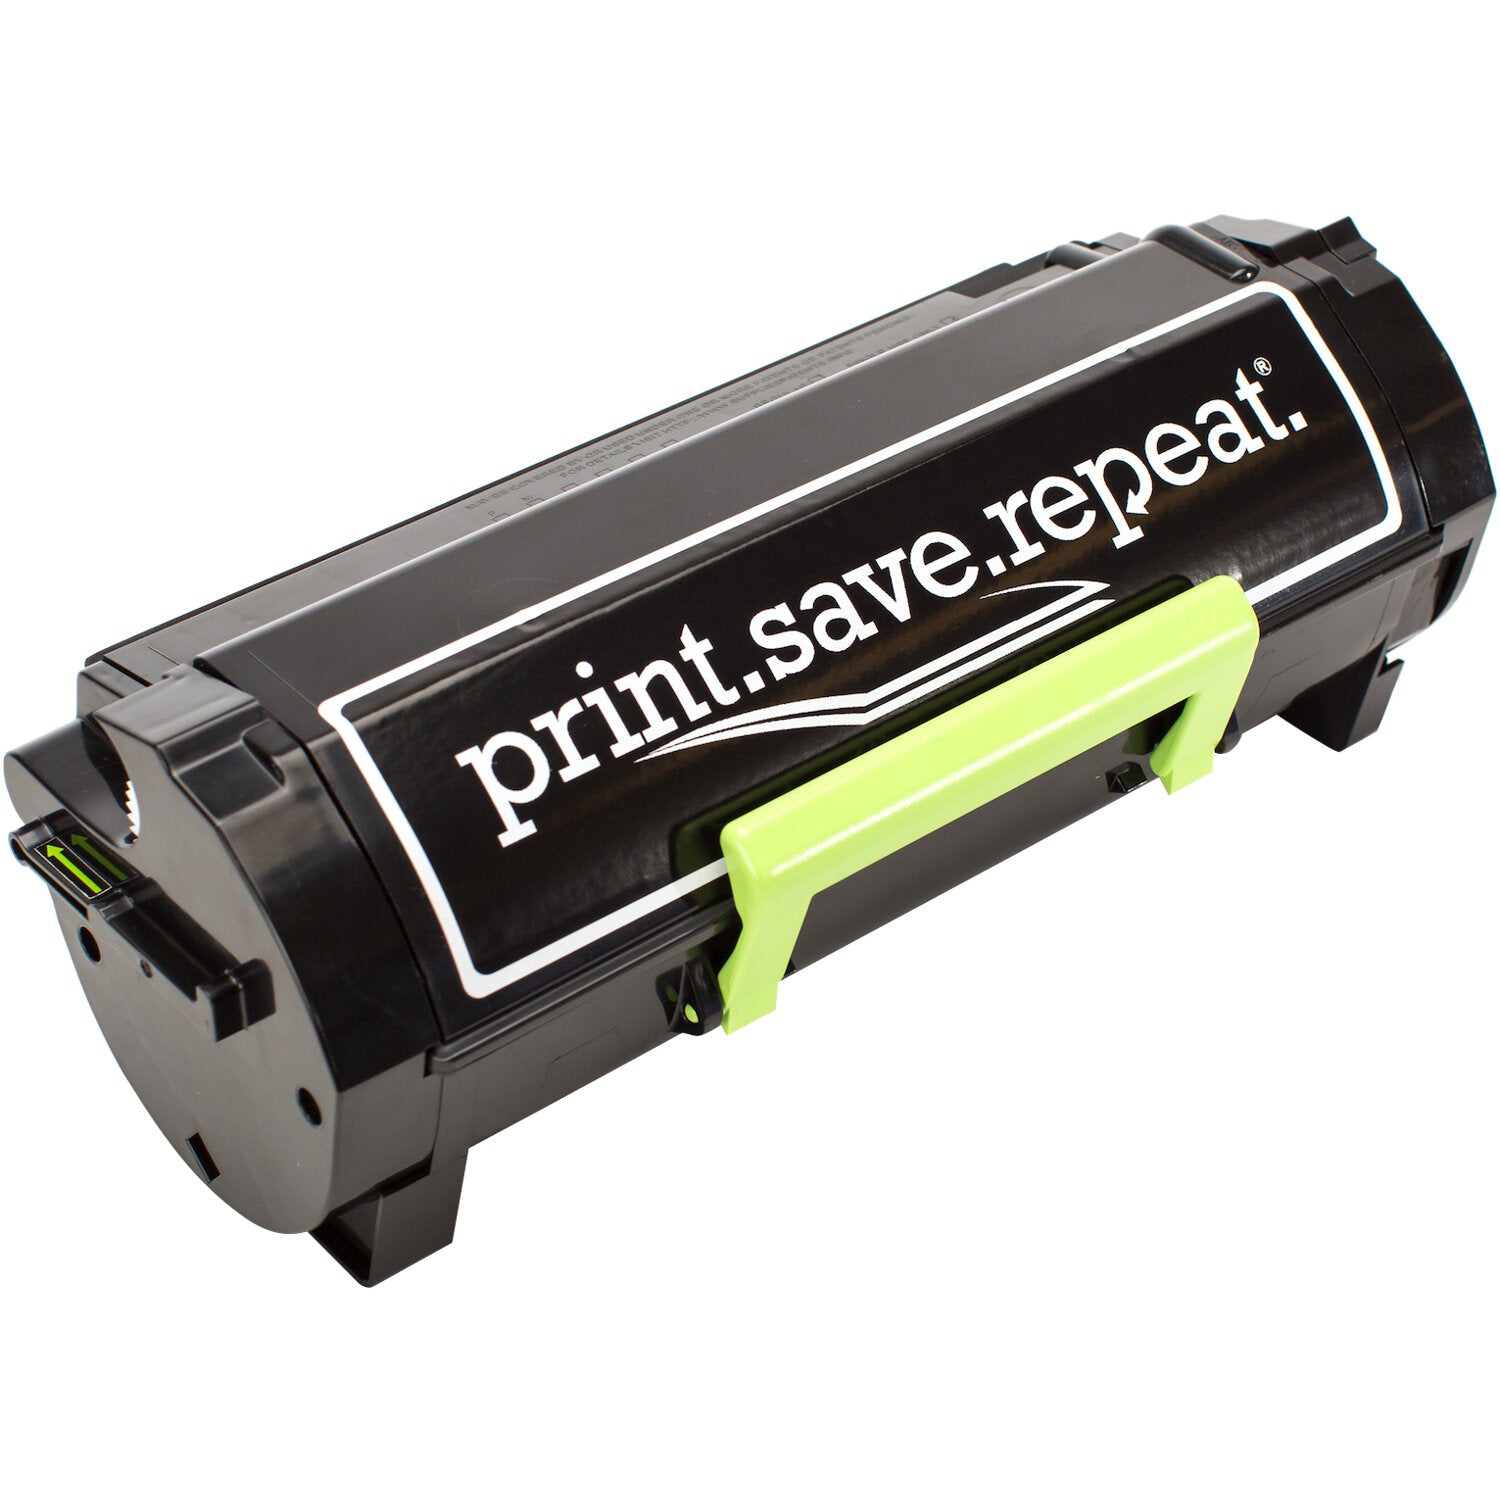 Print.Save.Repeat. Lexmark 501U Ultra High Yield Remanufactured Toner Cartridge (50F1U00) for MS510, MS610 [20,000 Pages]